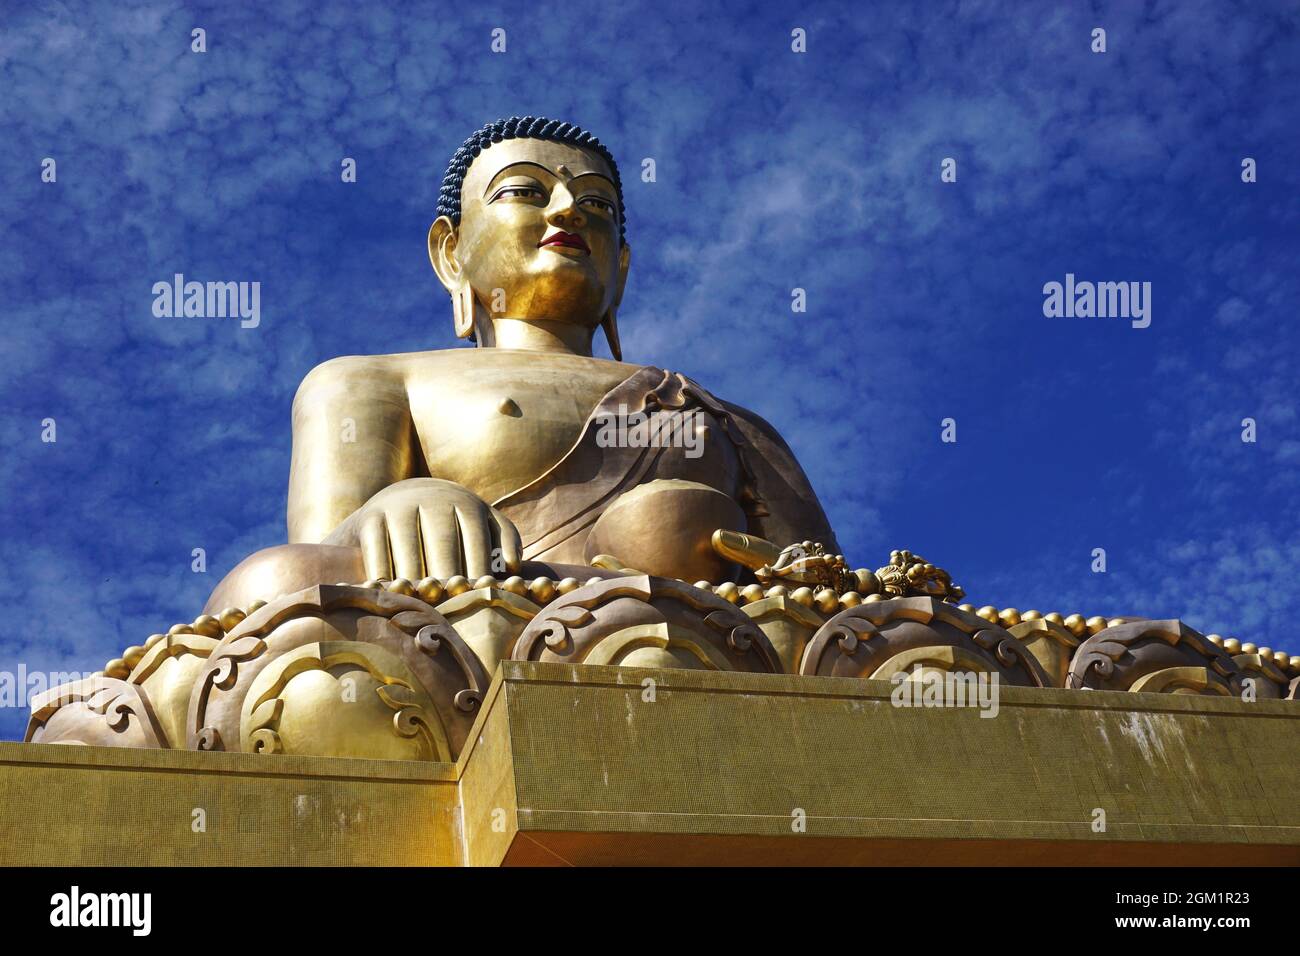 The 51.5-meter-tall Buddha Dordenma statue, sits on a mountain in the Kuensel Phodrang nature park overlooking the entrance to Thimphu Valley, Bhutan. Stock Photo